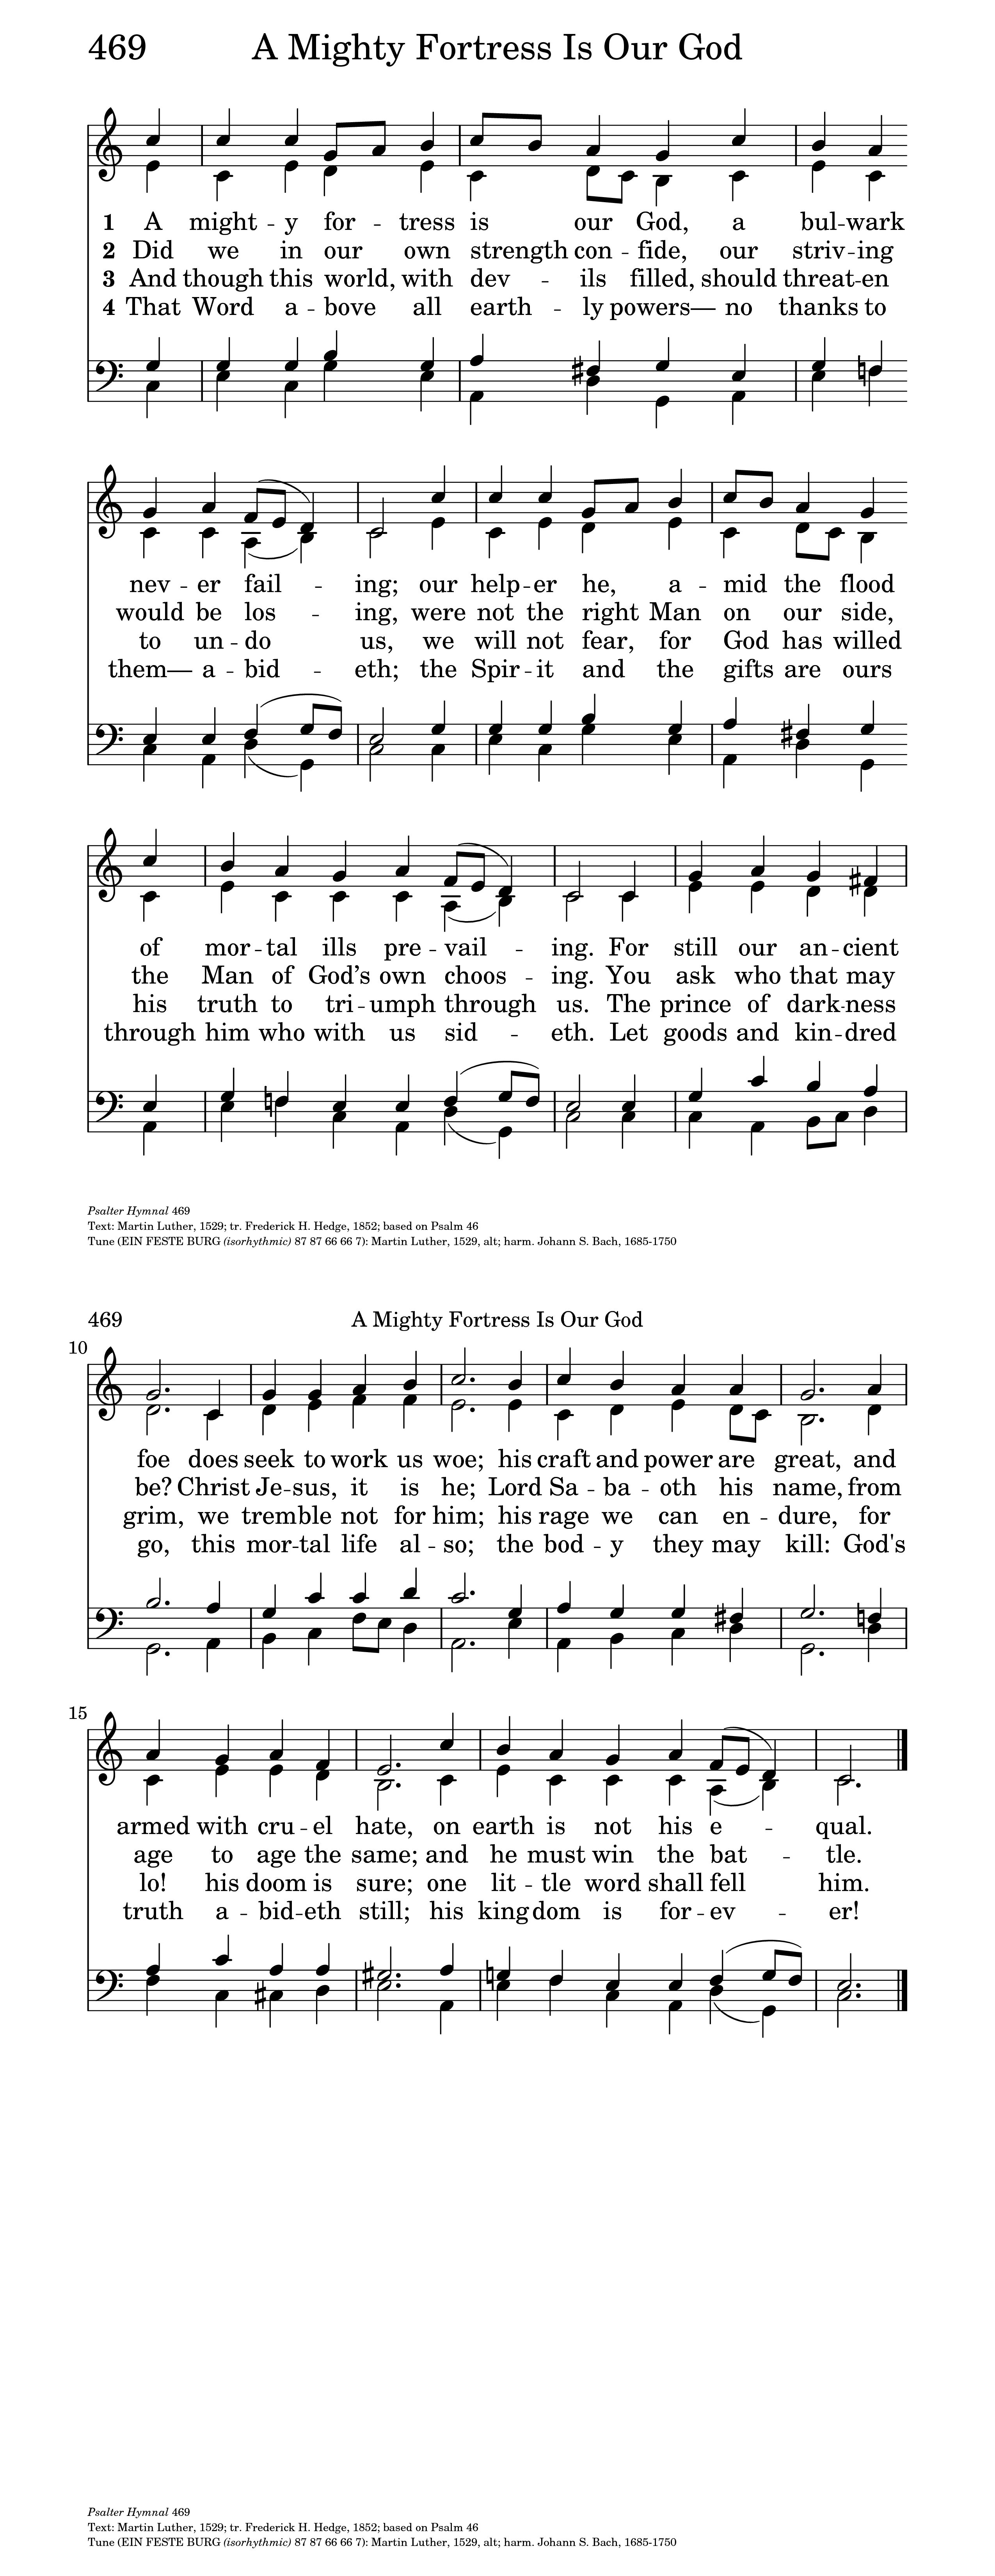 A Mighty Fortress Is Our God - Lyrics, Hymn Meaning and Story